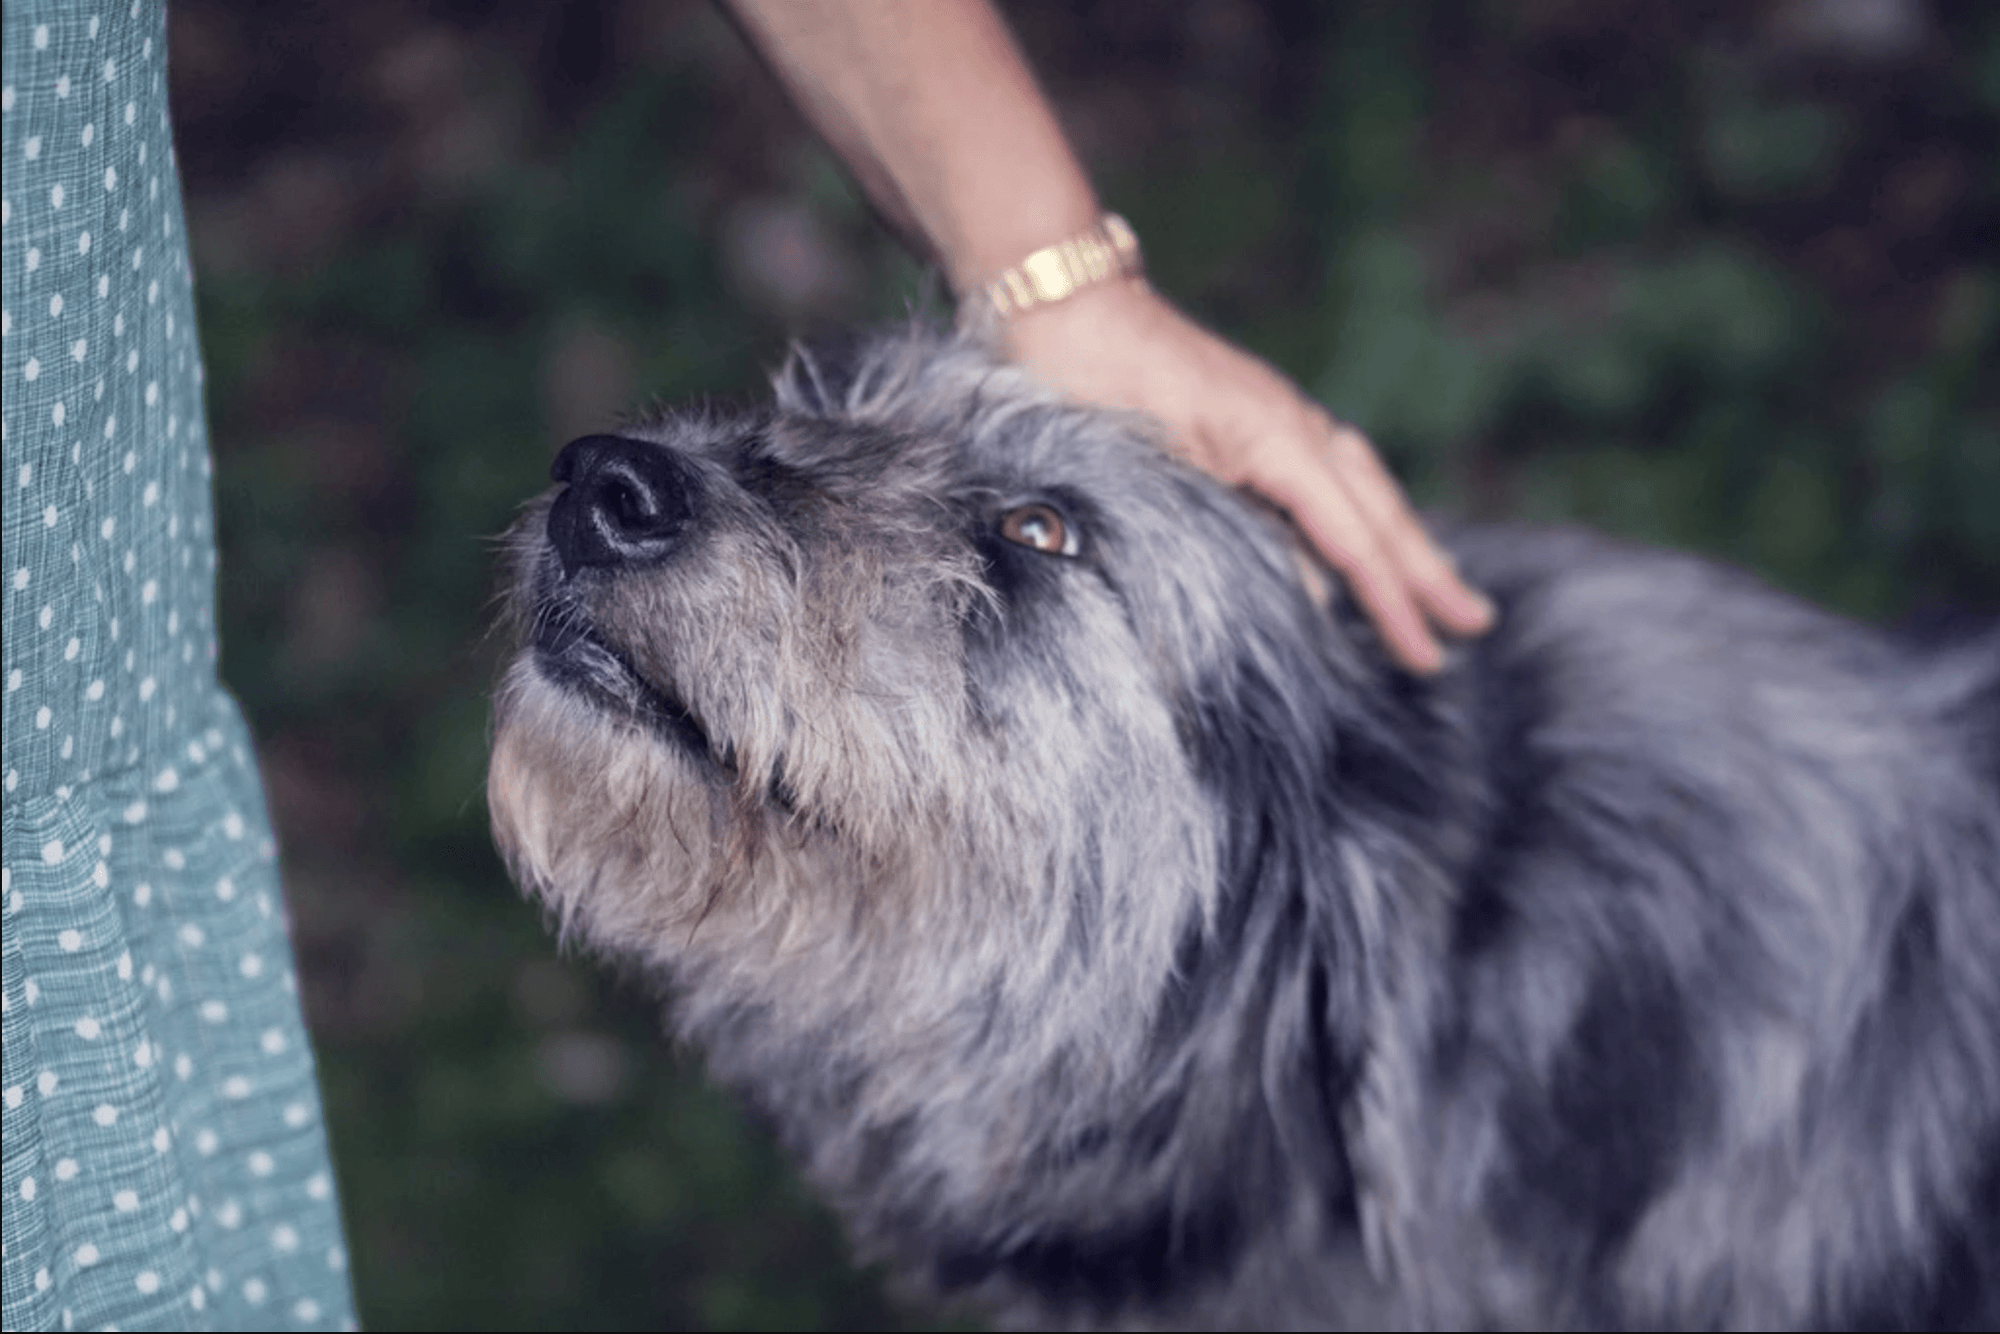 How To Greet A Dog: 5 Dos and Don’ts - Good Dog People™